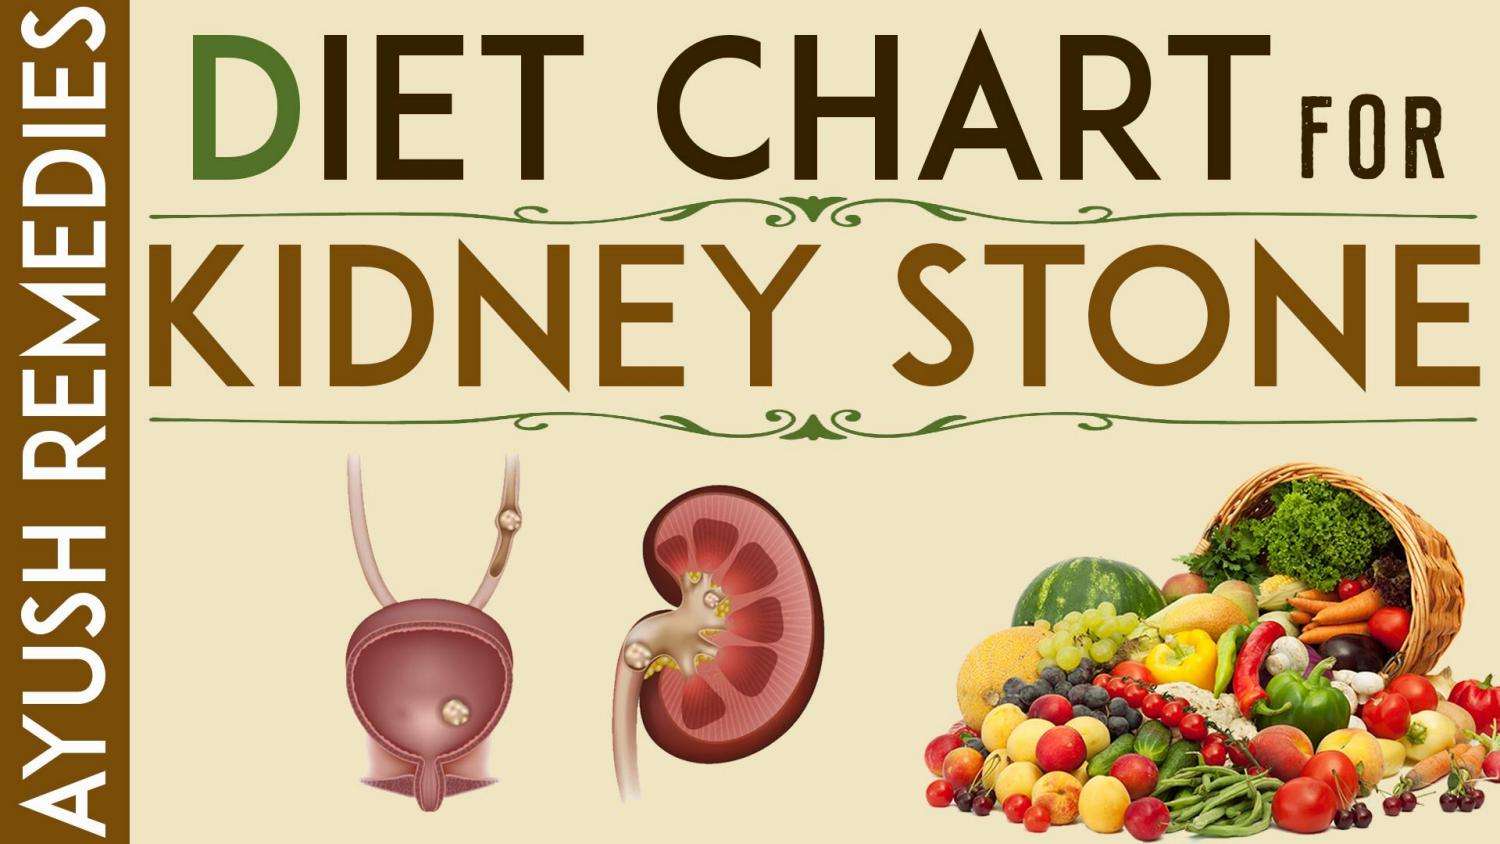 Kidney Stone Diet, List of Foods to Eat and Avoid During Kidney Stones ...